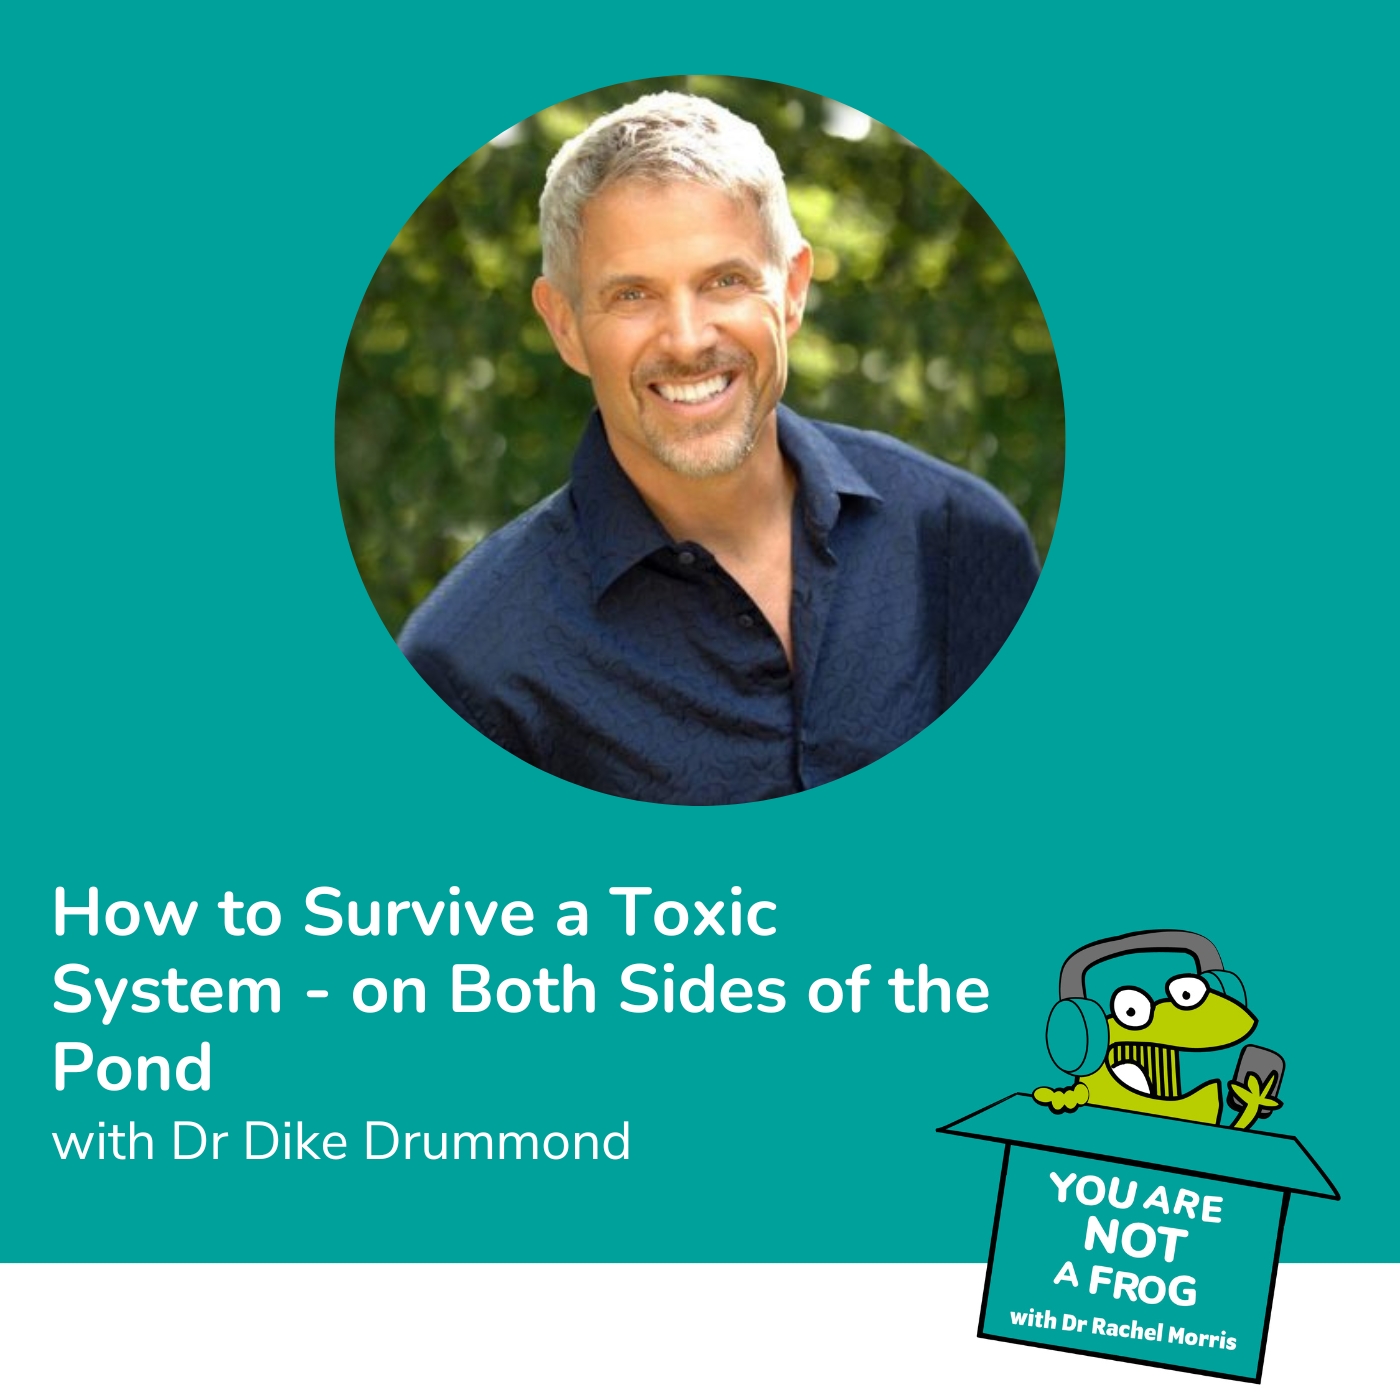 How to Survive a Toxic System - on Both Sides of the Pond